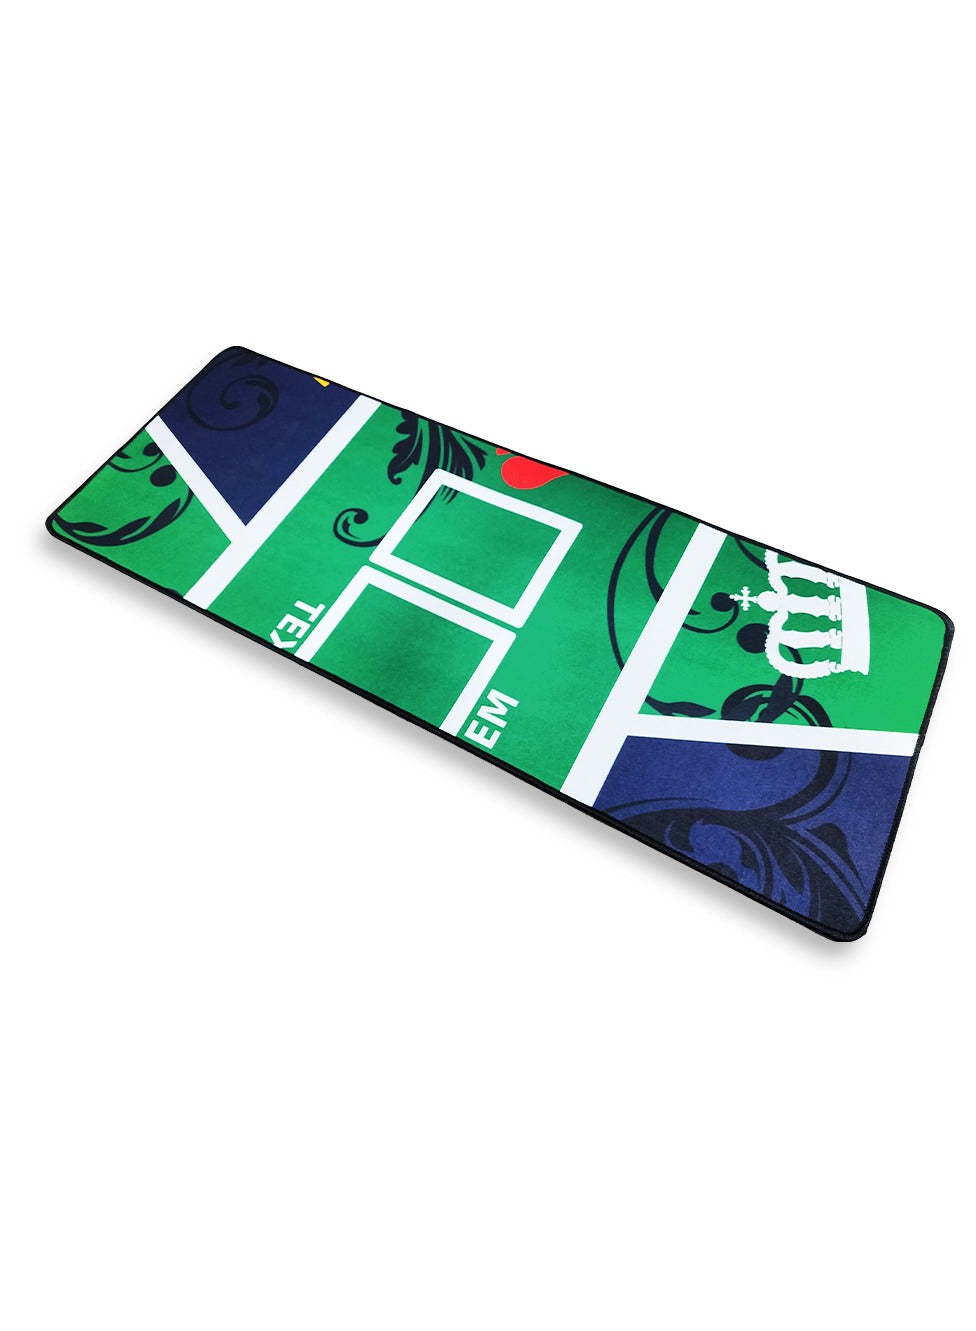 Gaming Mouse Pad -Colour Designs- Size 80X30 CM - Stitched Edges Anti-slip rubber base - Optimized for all mouse sensitivities and sensors - Model Mix Pads KK3